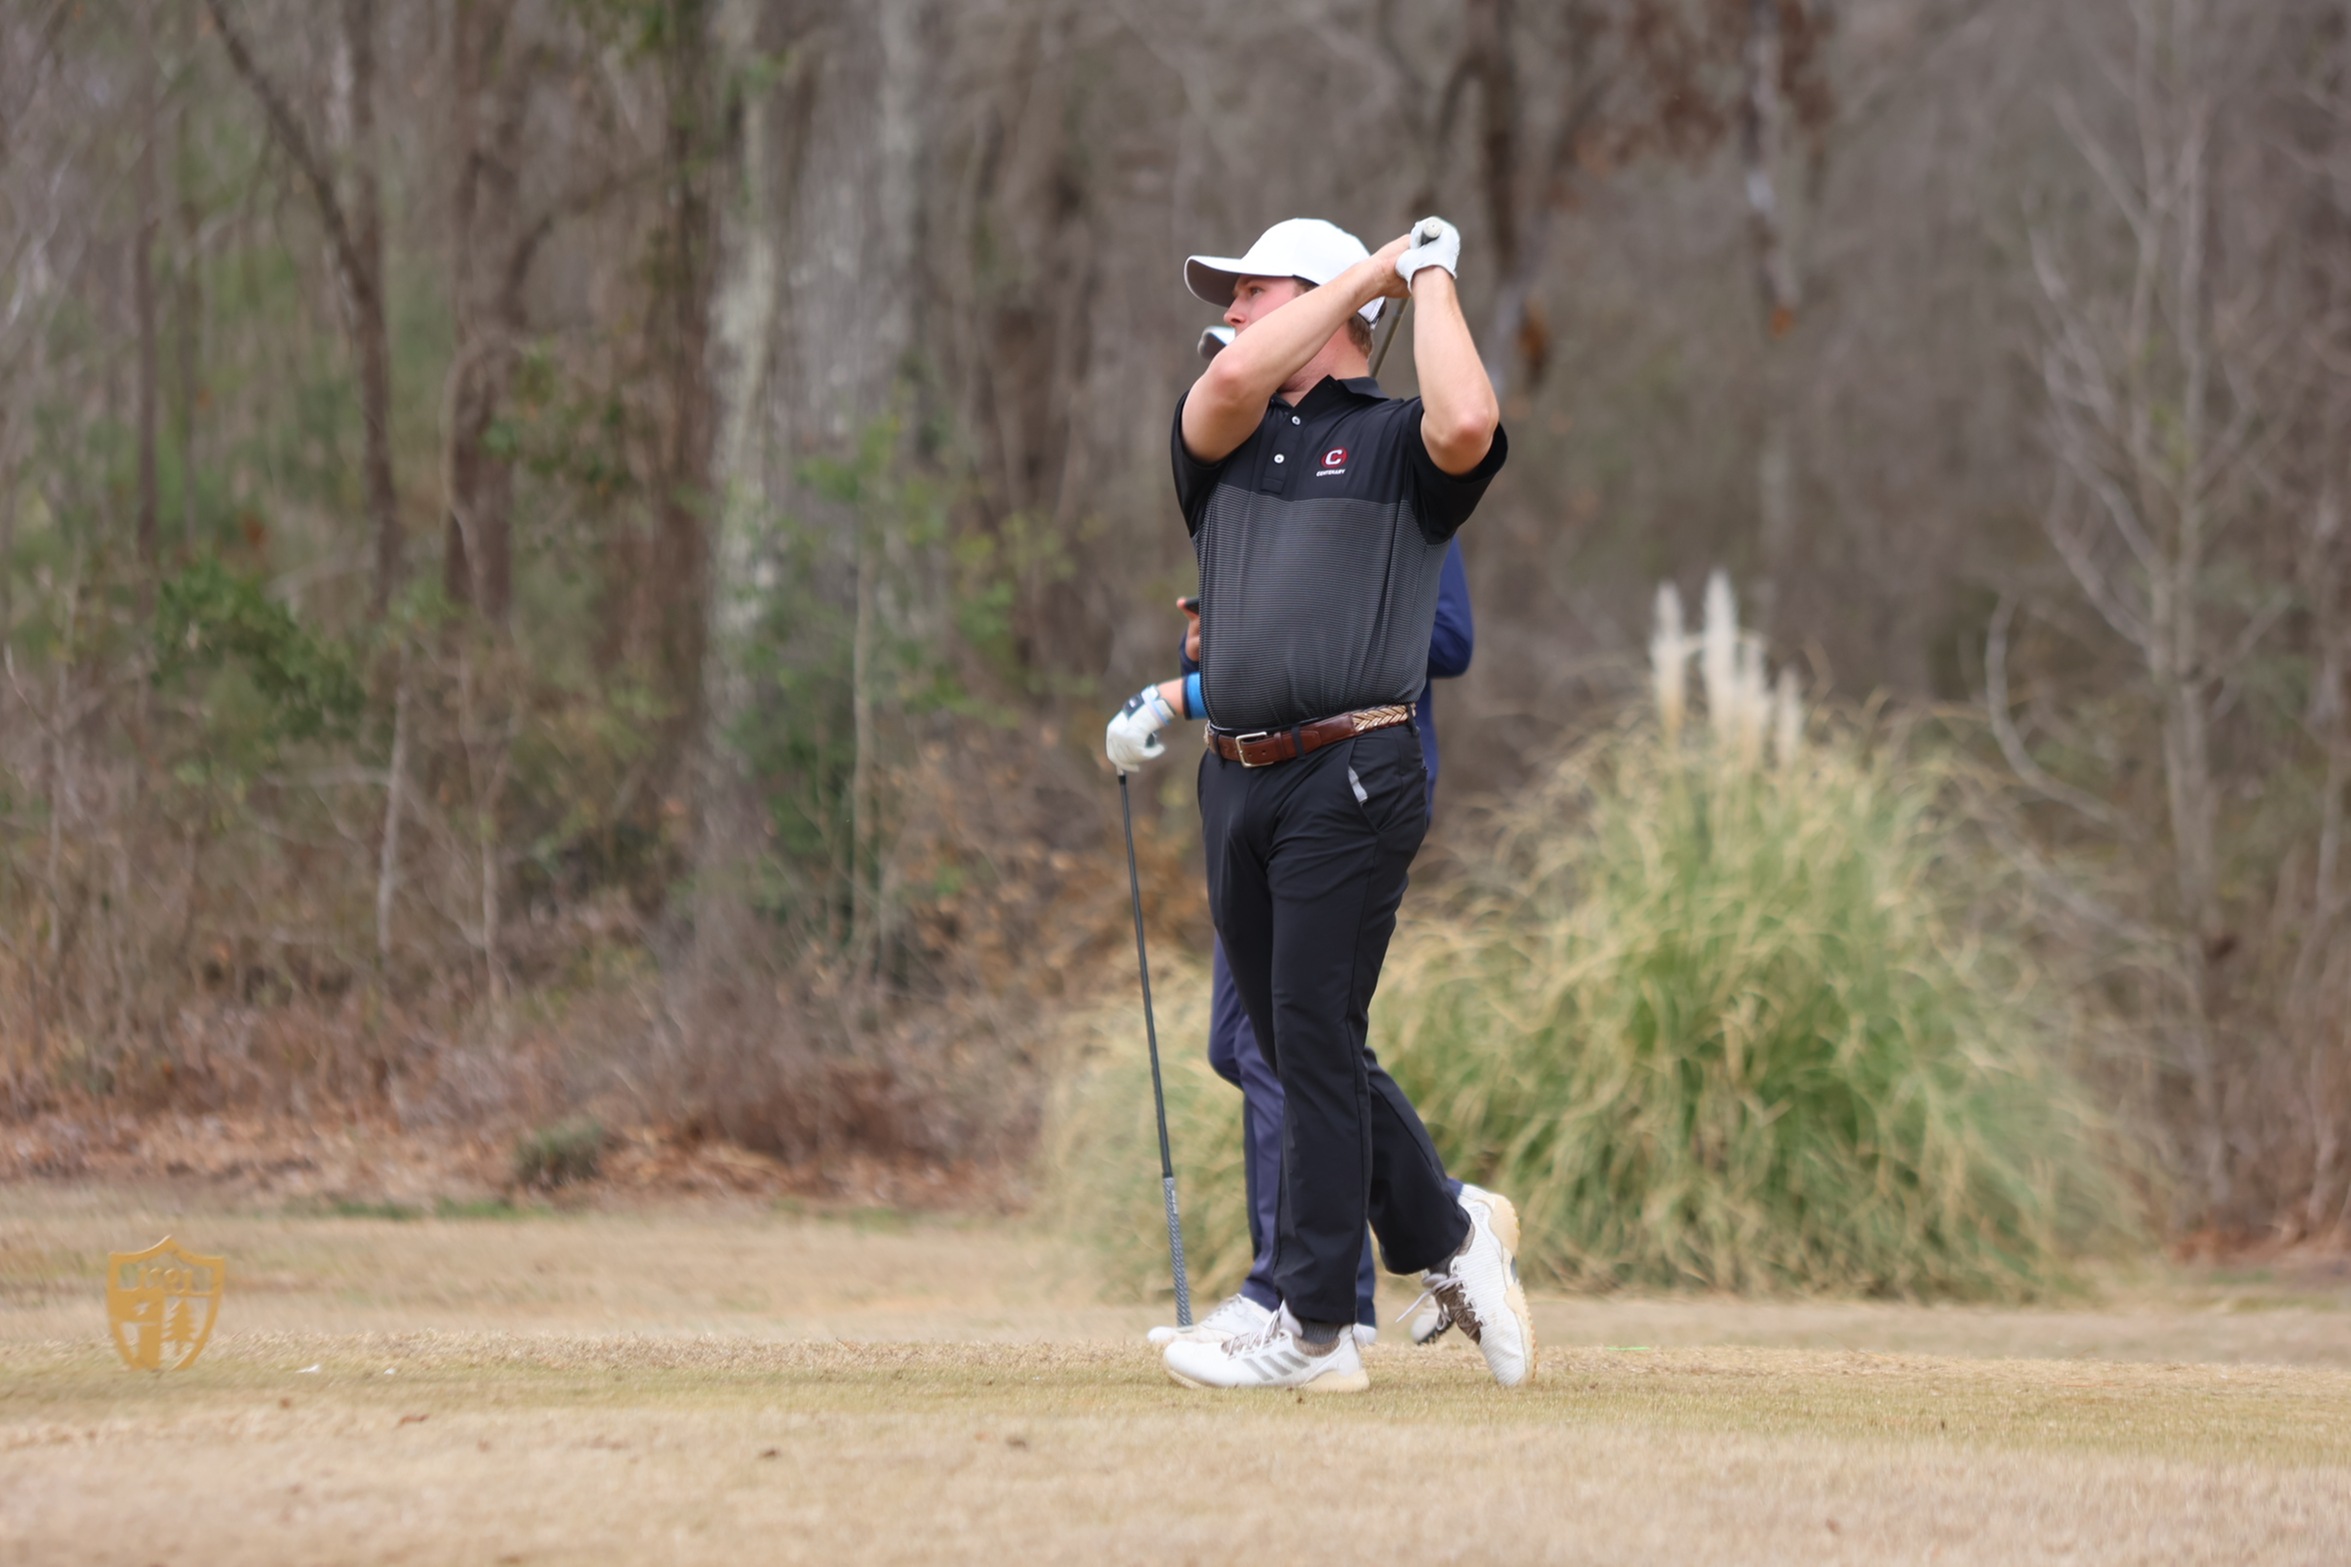 The Gents aim to shoot a low number on Tuesday in the final round of the Mary Hardin-Baylor Fall Intercollegiate.